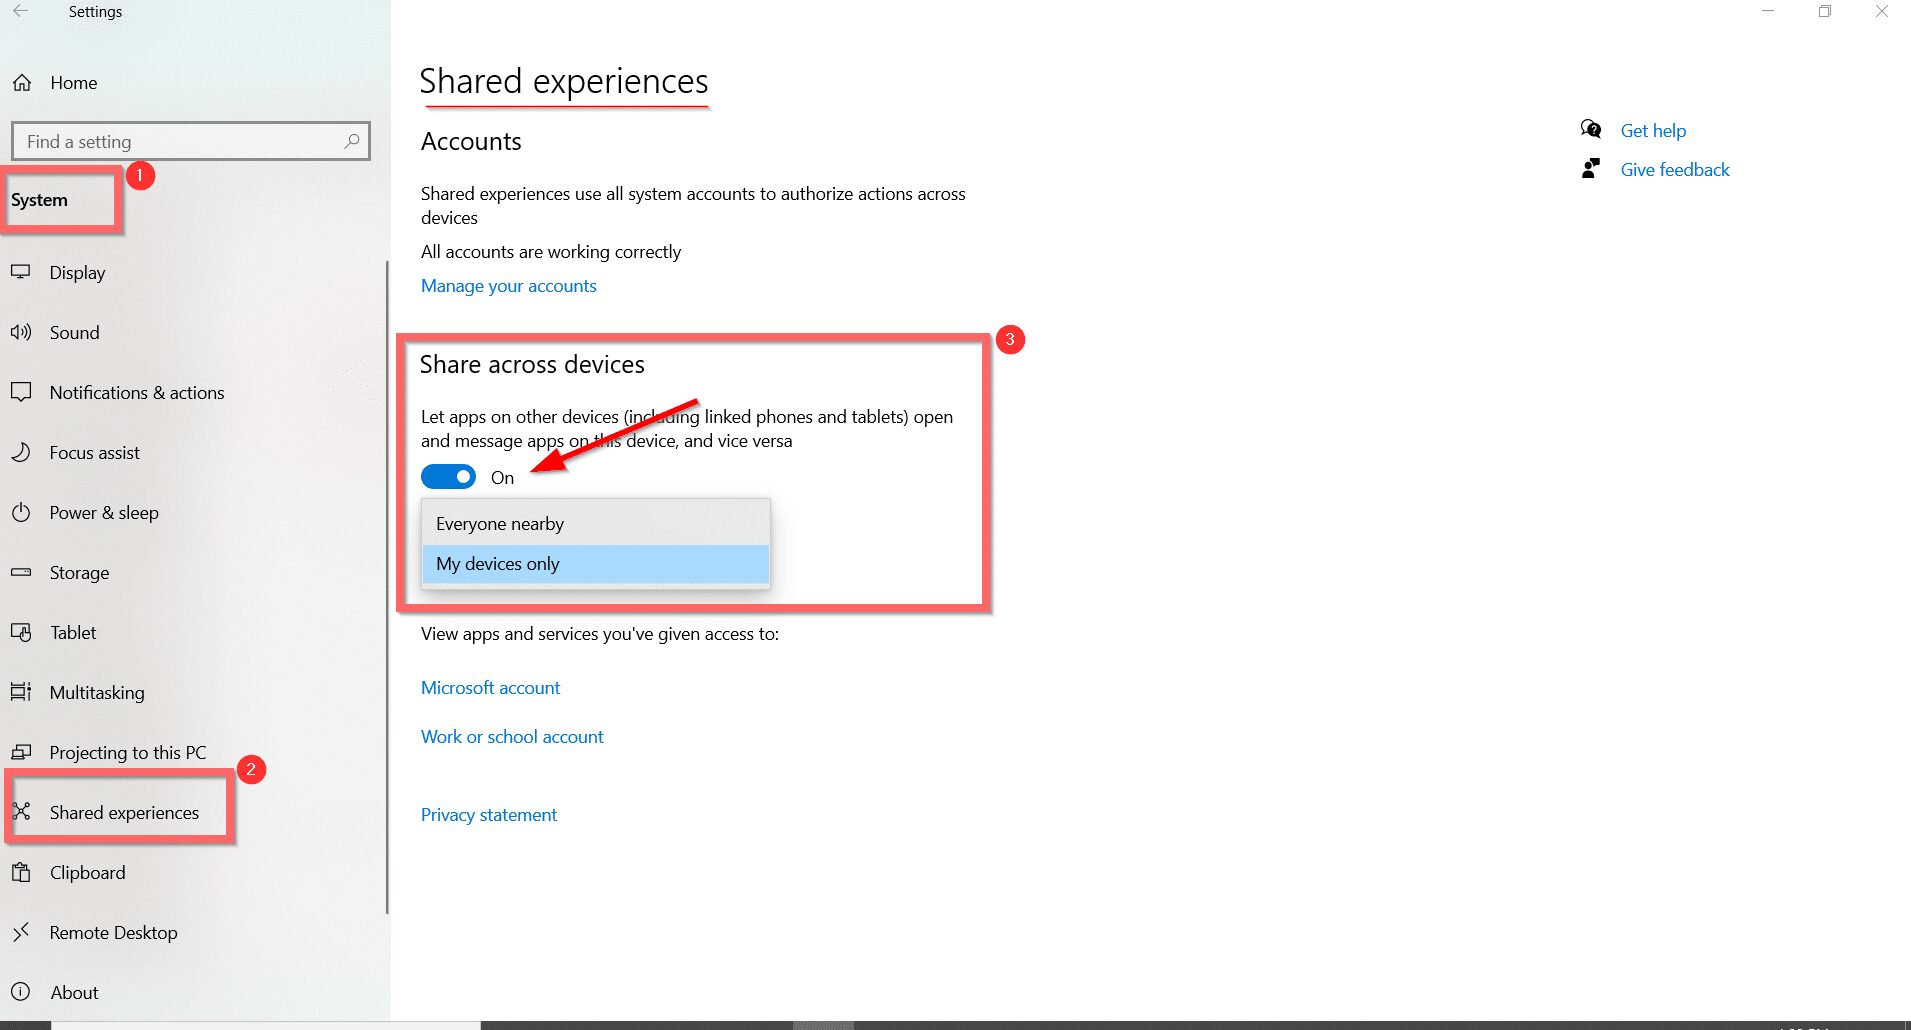 Just How to Use Shared Experiences Settings in Windows 10